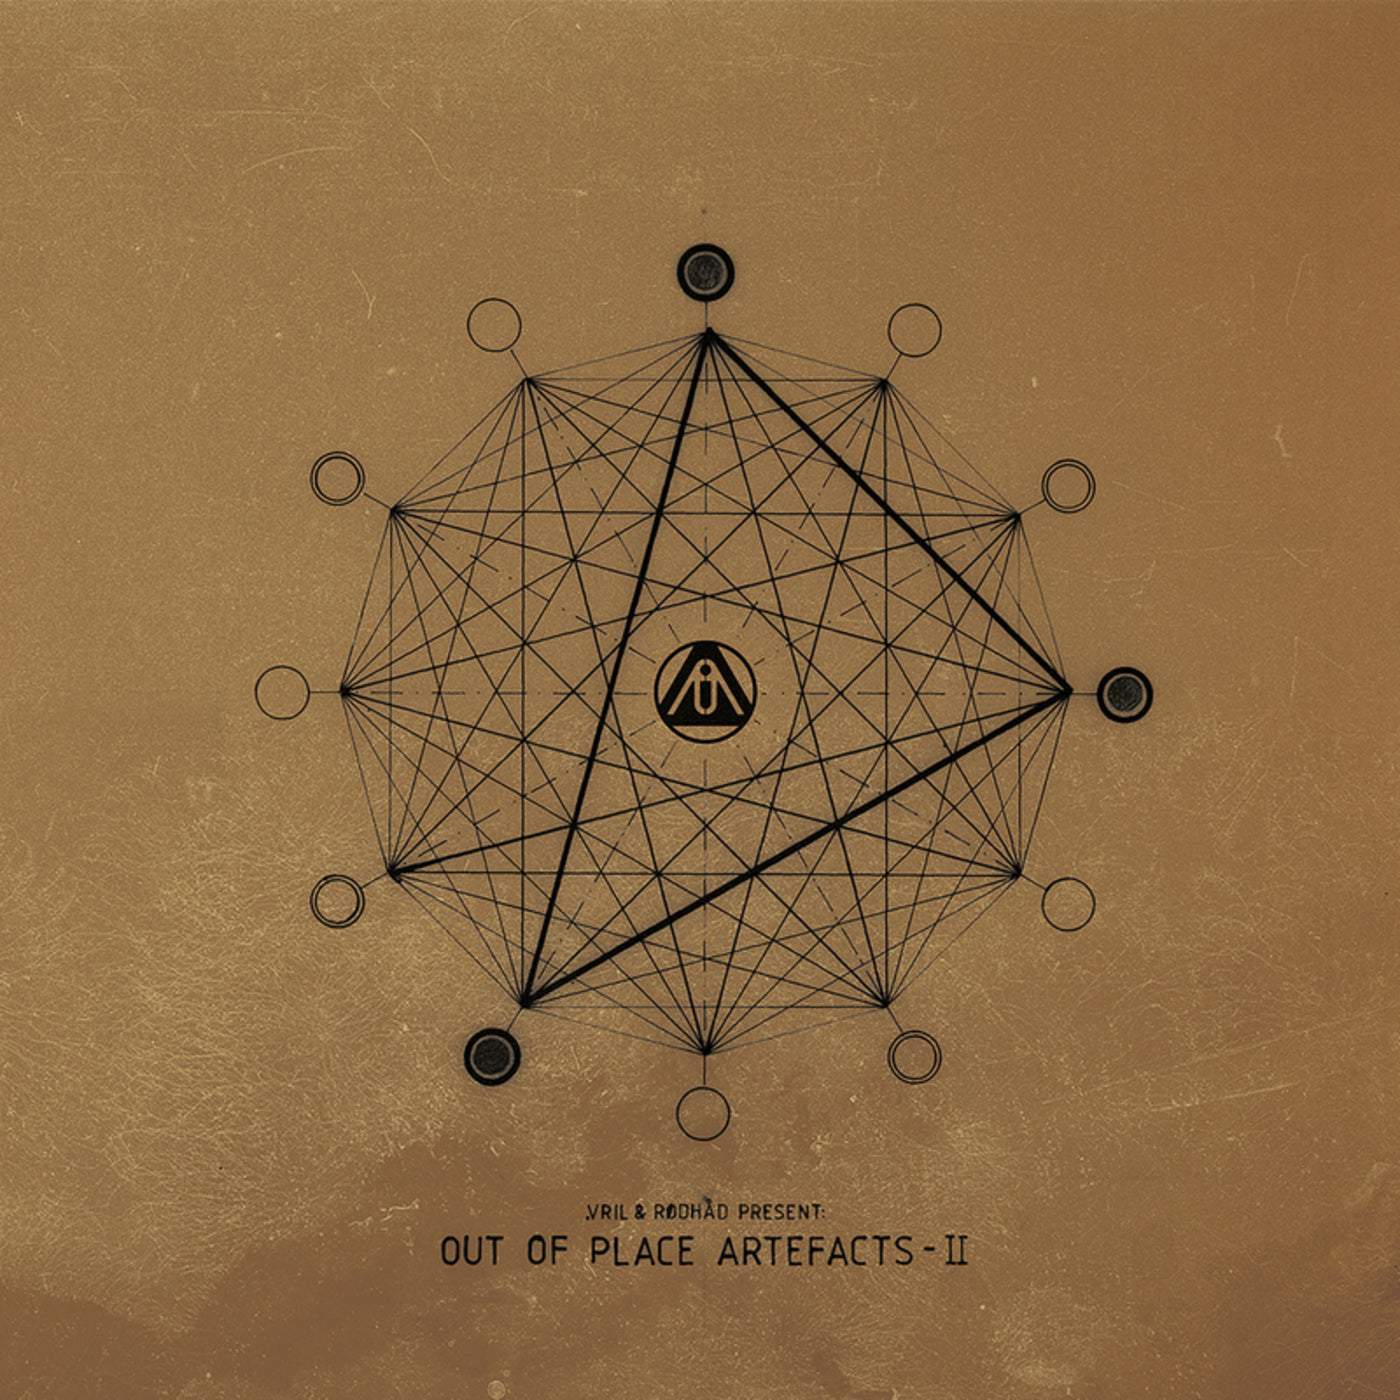 image cover: Vril, Rødhåd, Out Of Place Artefacts - .Vril & Rdhad Present Out Of Place Artefacts - II / WSNWG010